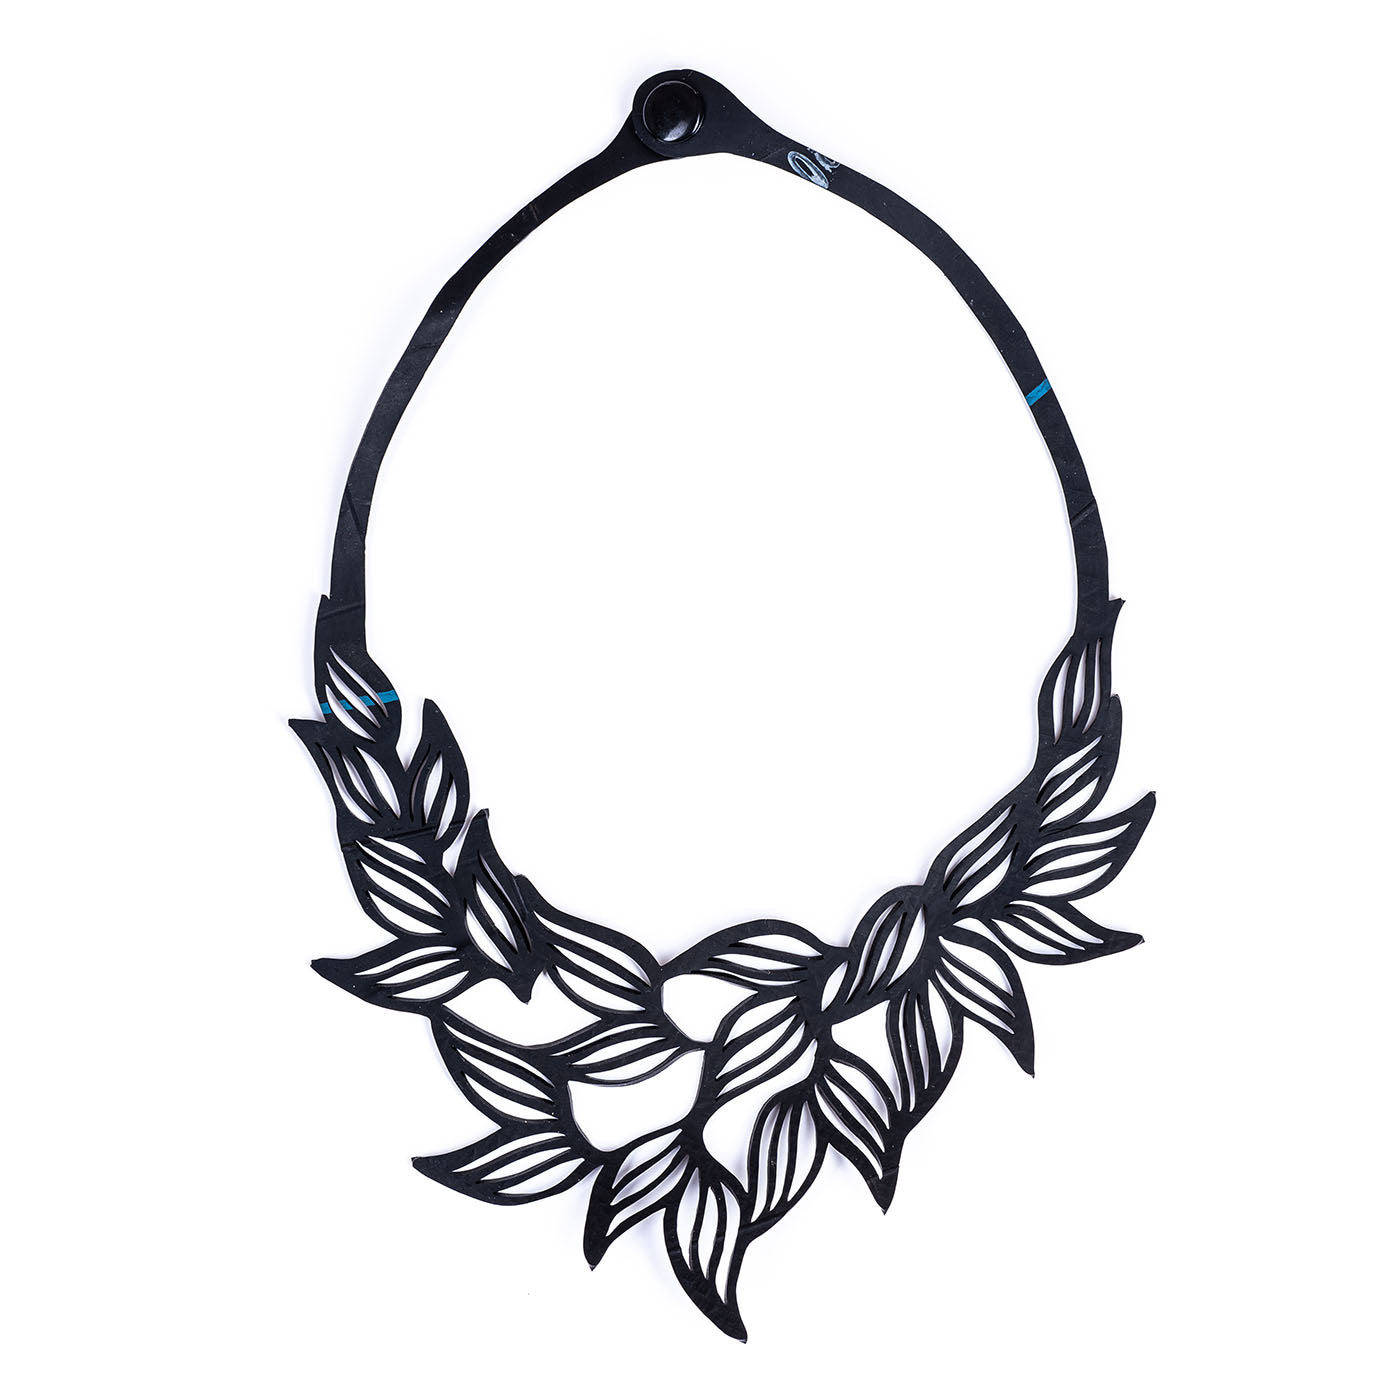 Jasmine Recycled Rubber Necklace by Paguro Upcycle